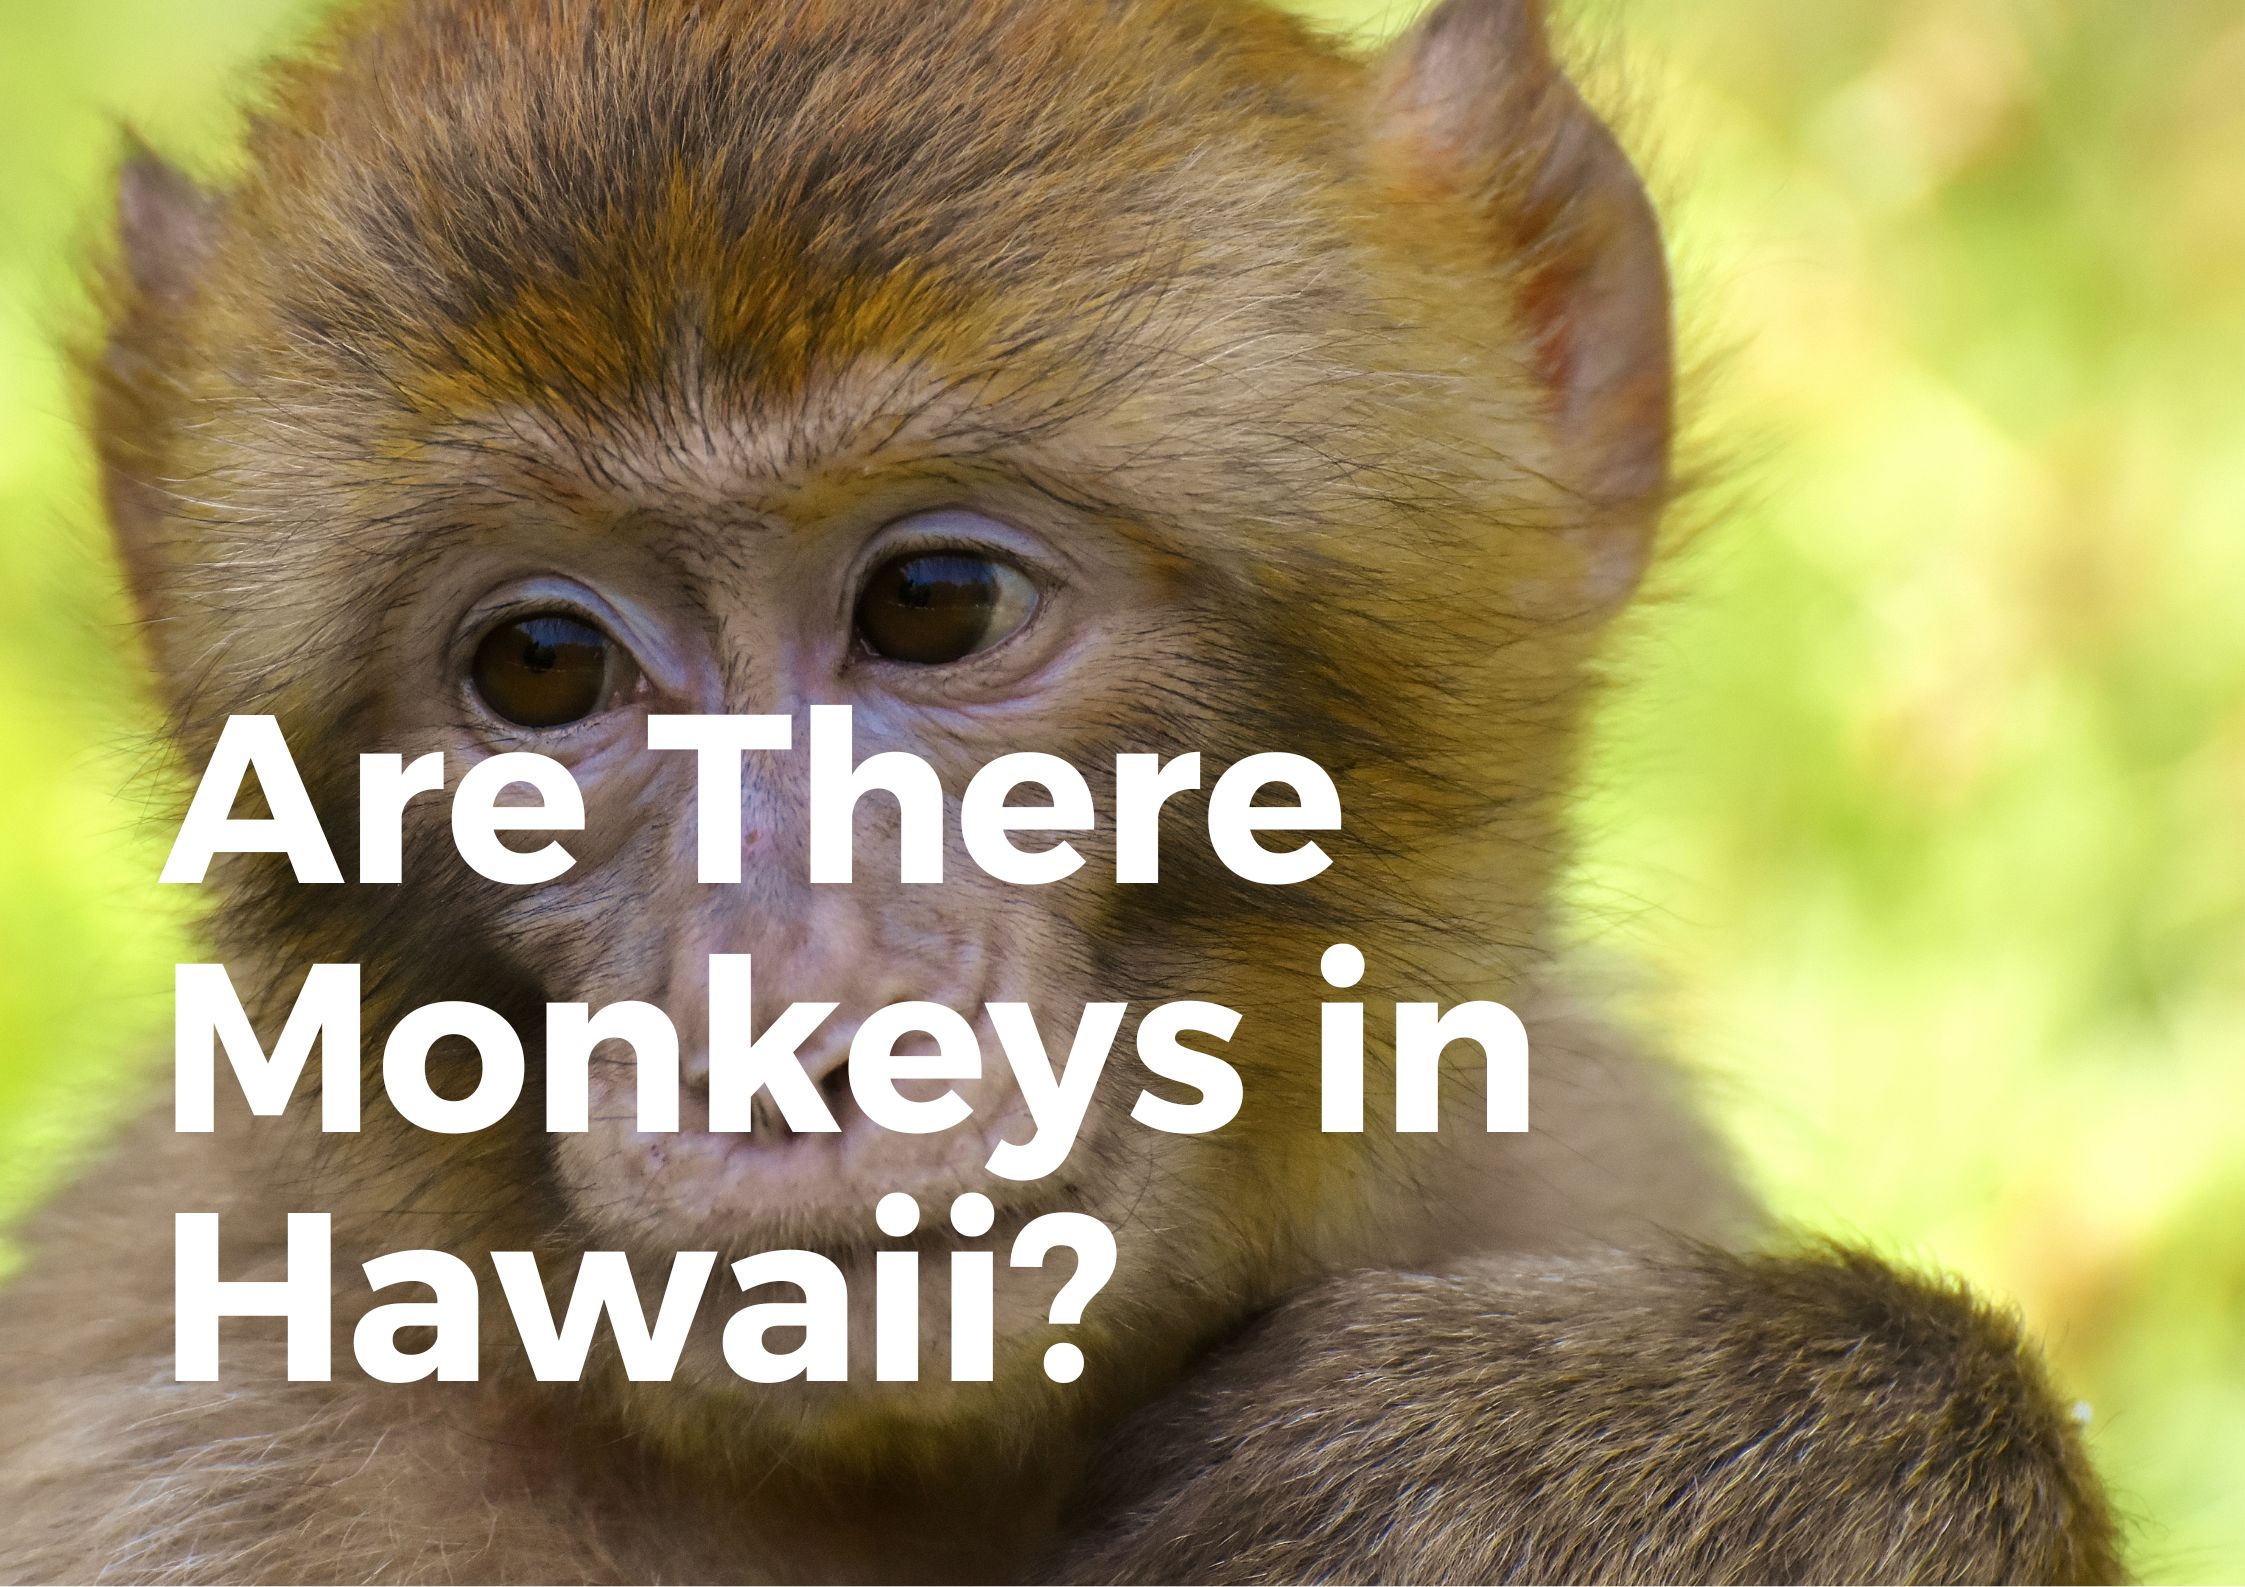 Are there monkeys in hawaii?